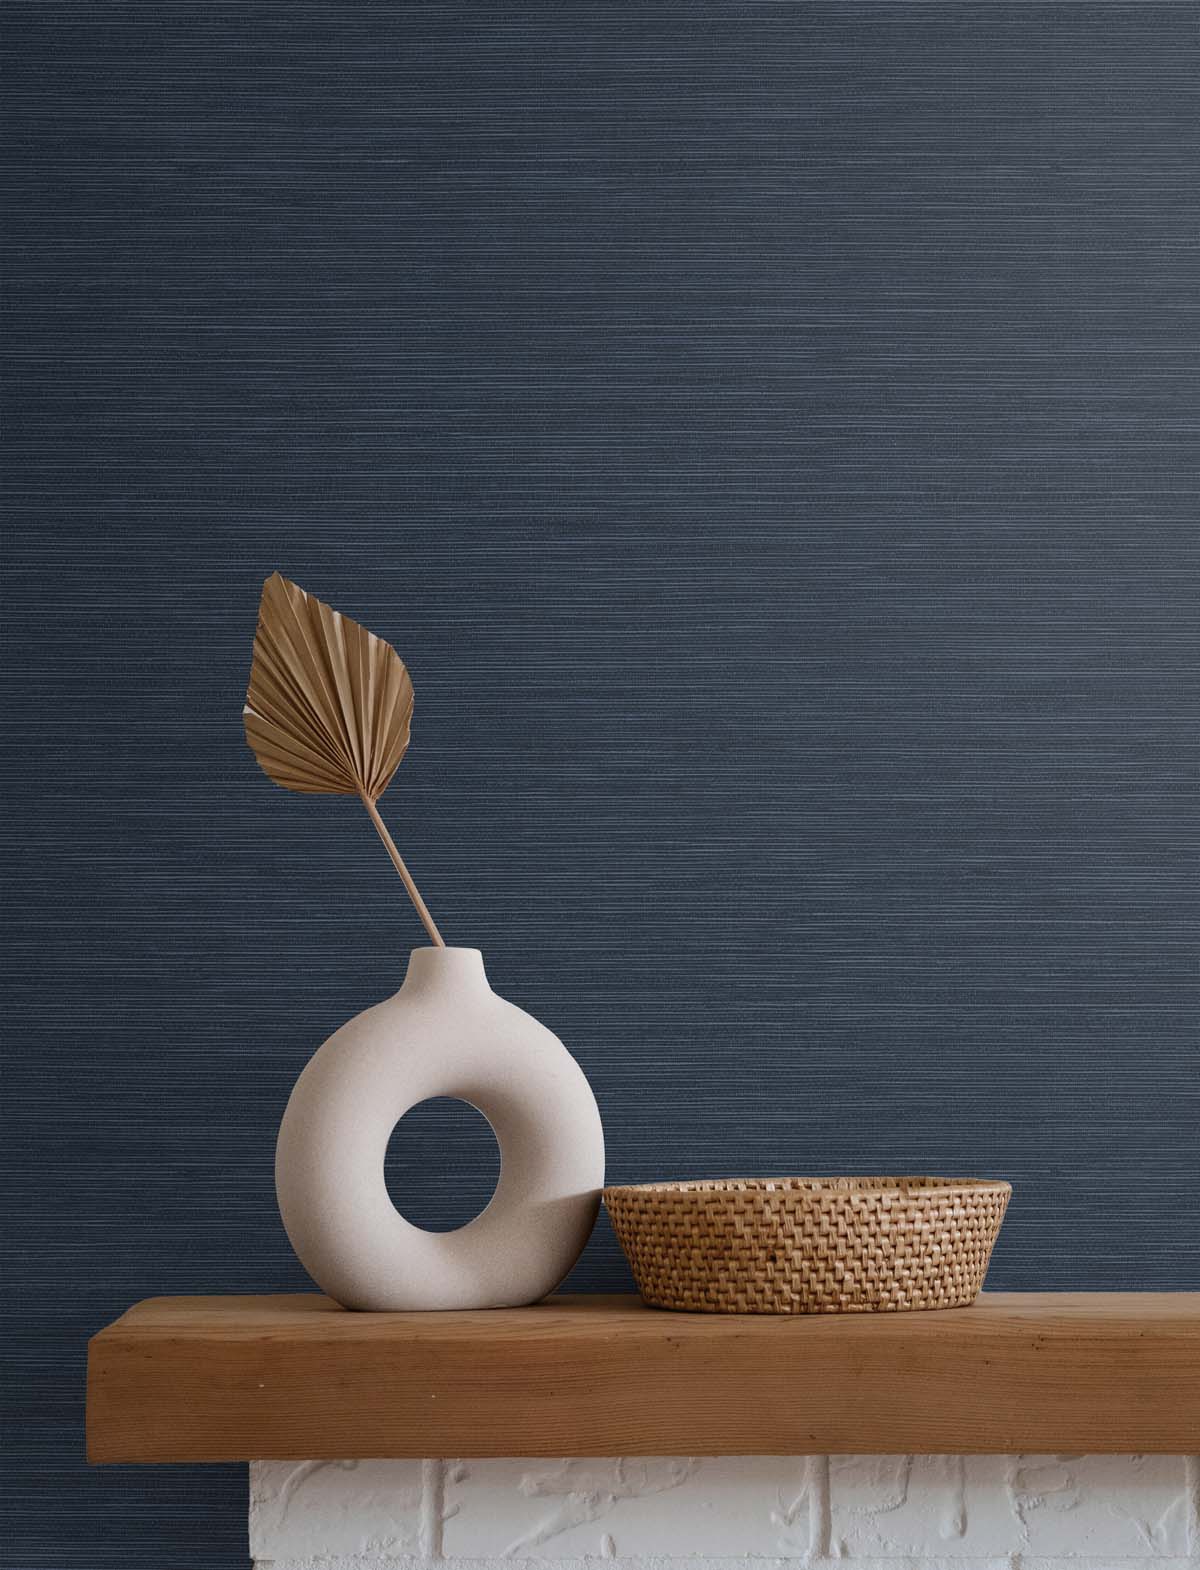 dark blue wallpaper with a white stone vase holding a golden brown leaf, next to a beige wicker basket, atop a wooden mantle and white brick fireplace.